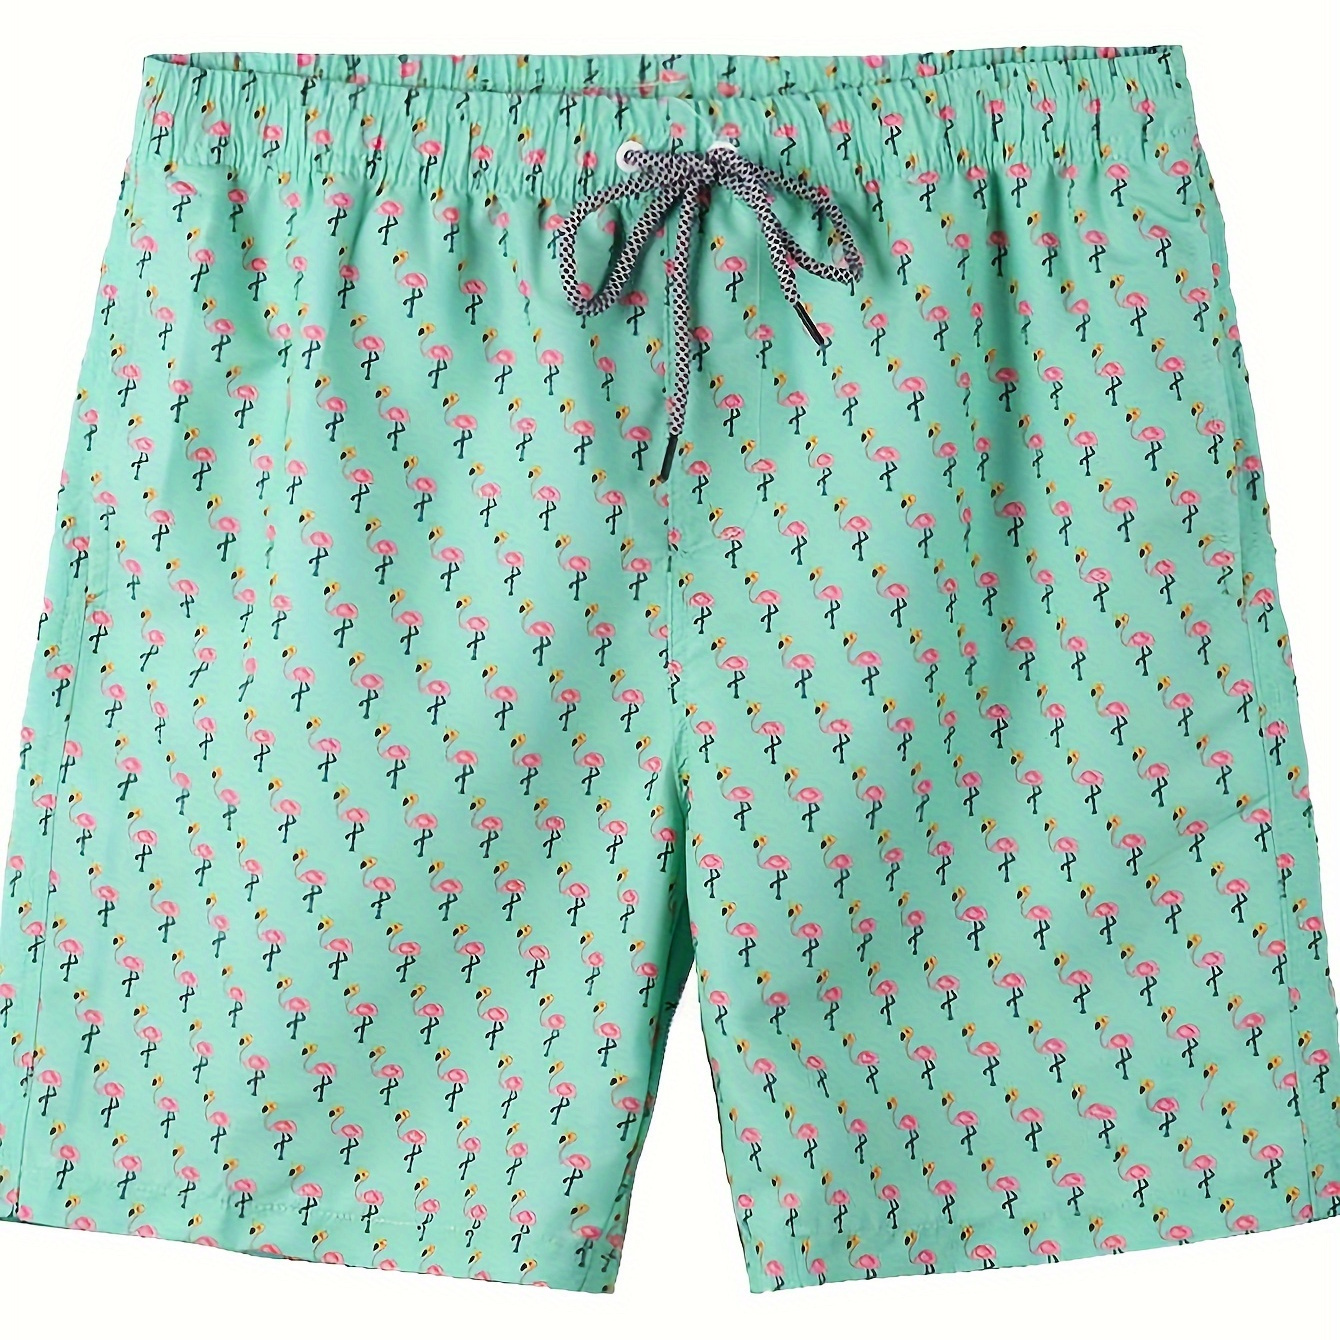 

Boys Mint Green Swim Trunks With Flamingo Print | Lightweight, Quick-dry Summer Shorts For Fun In The Sun